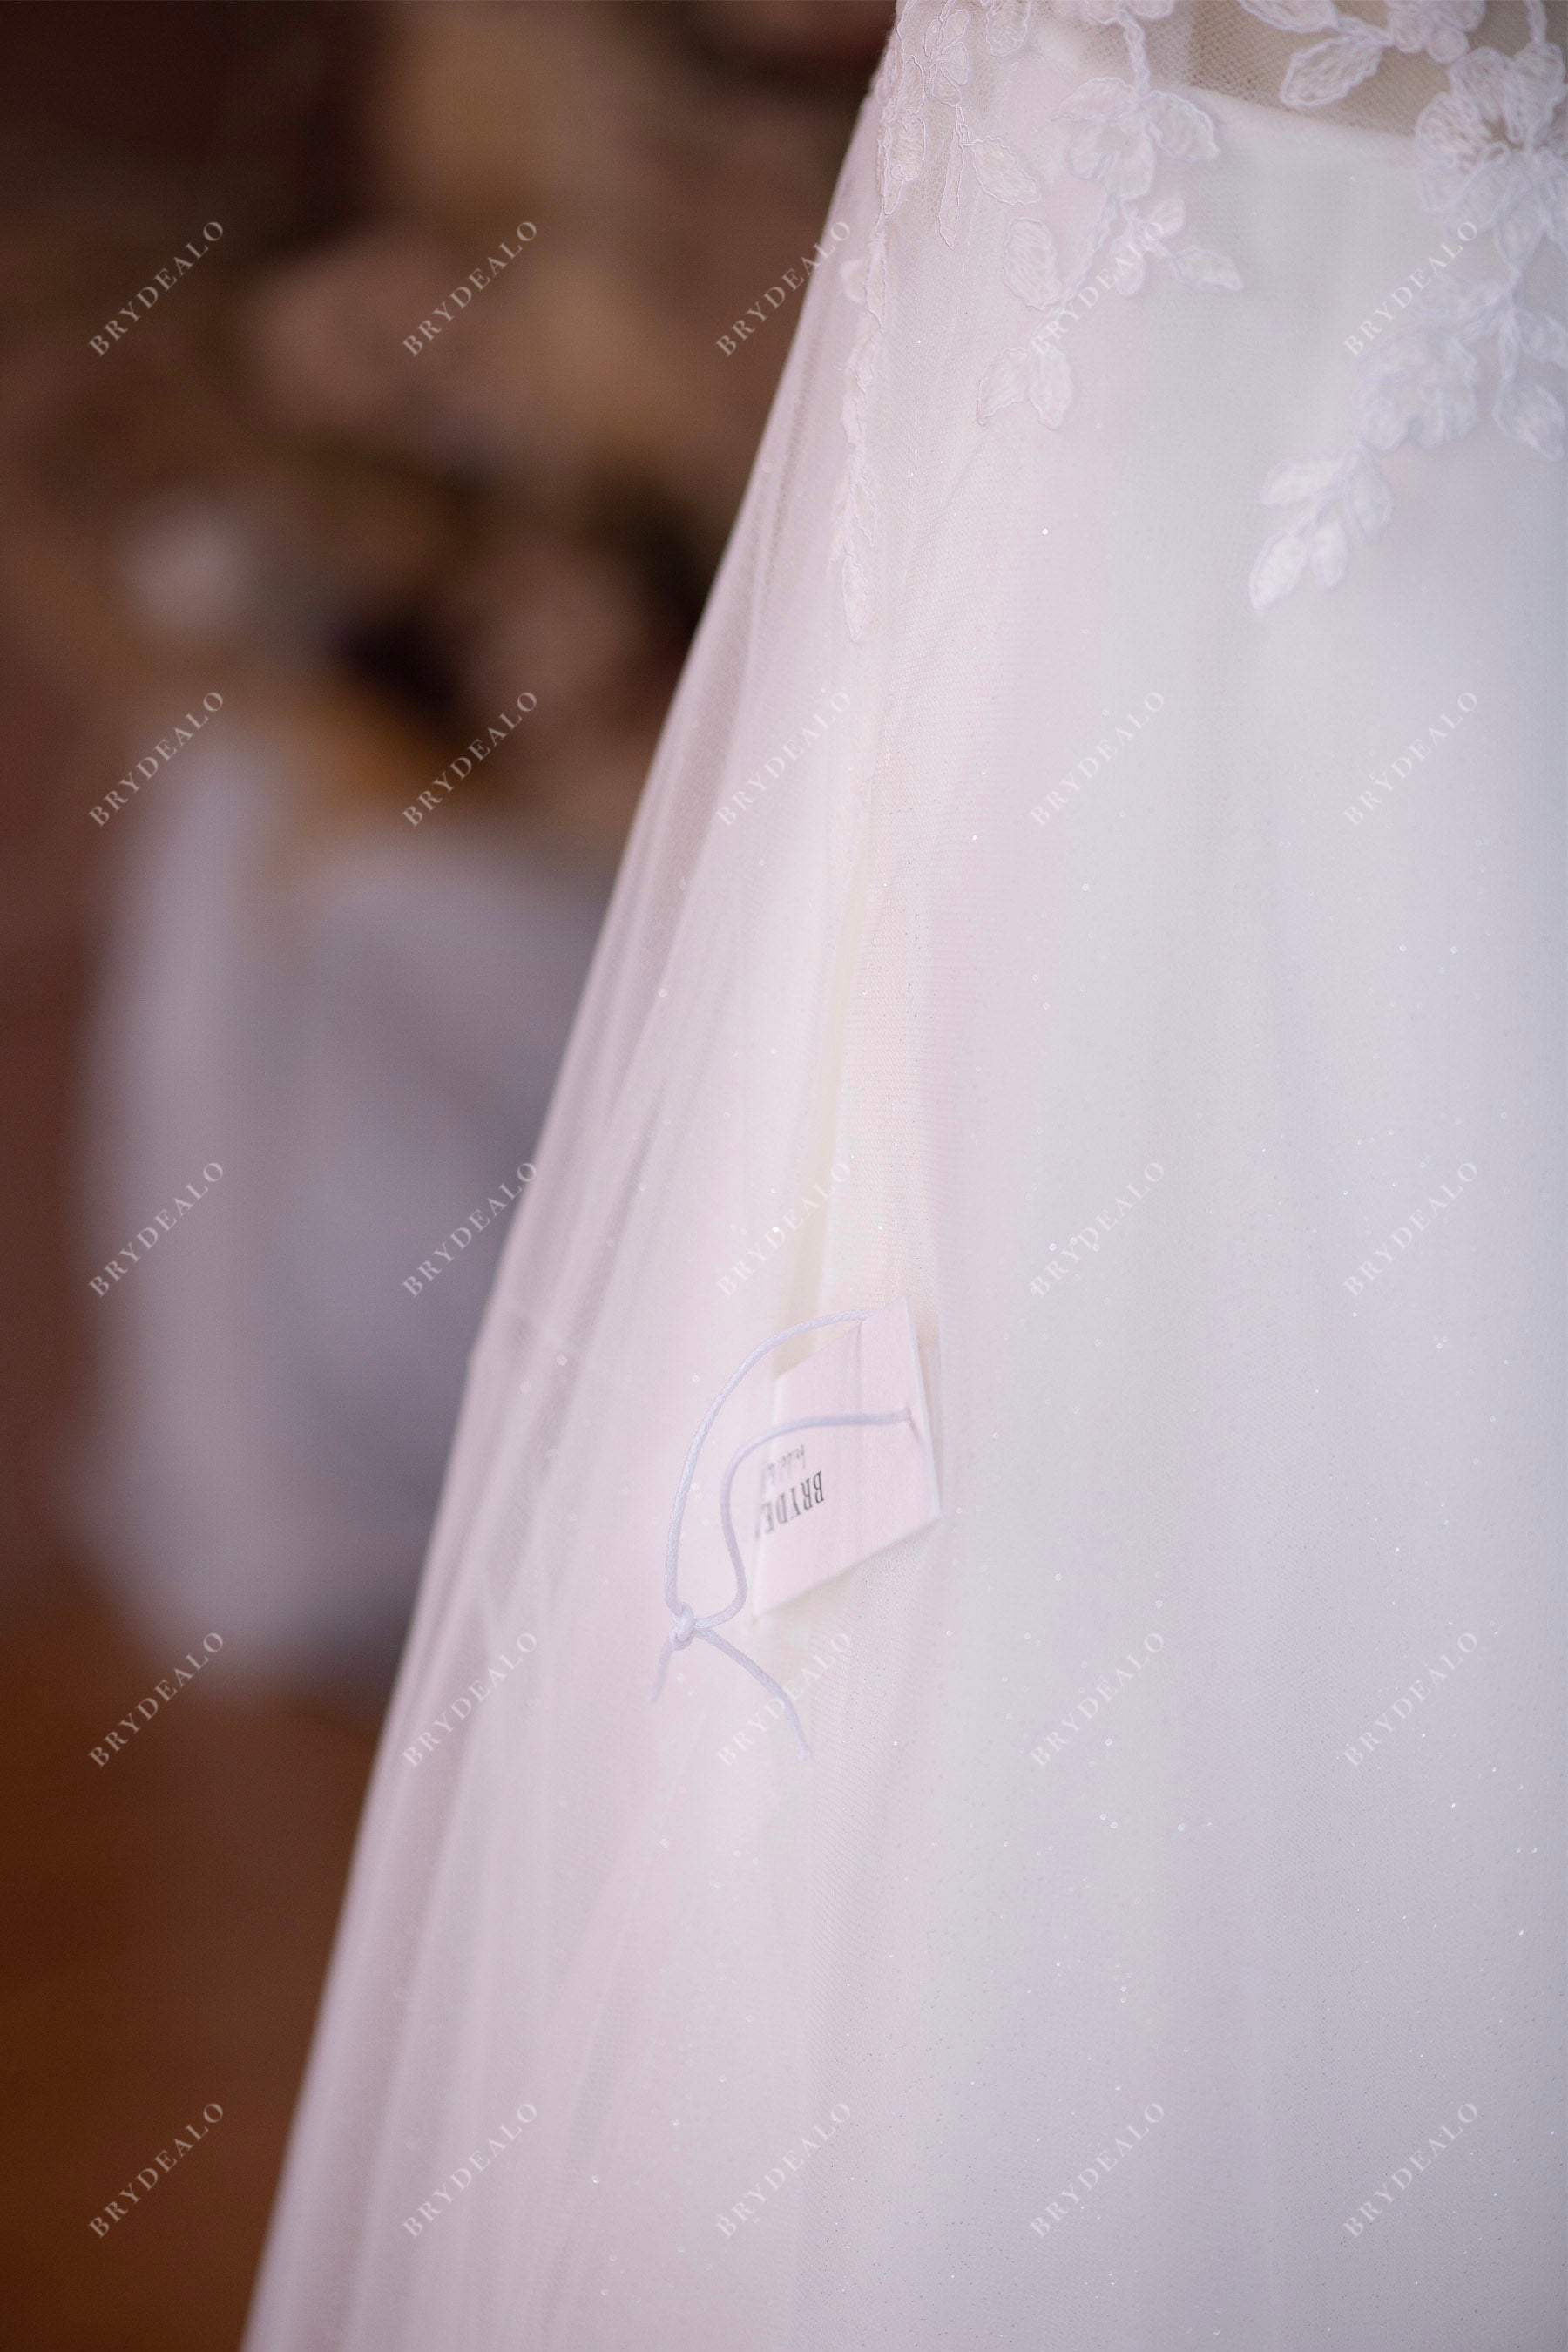 outdoor wedding dress with pocket